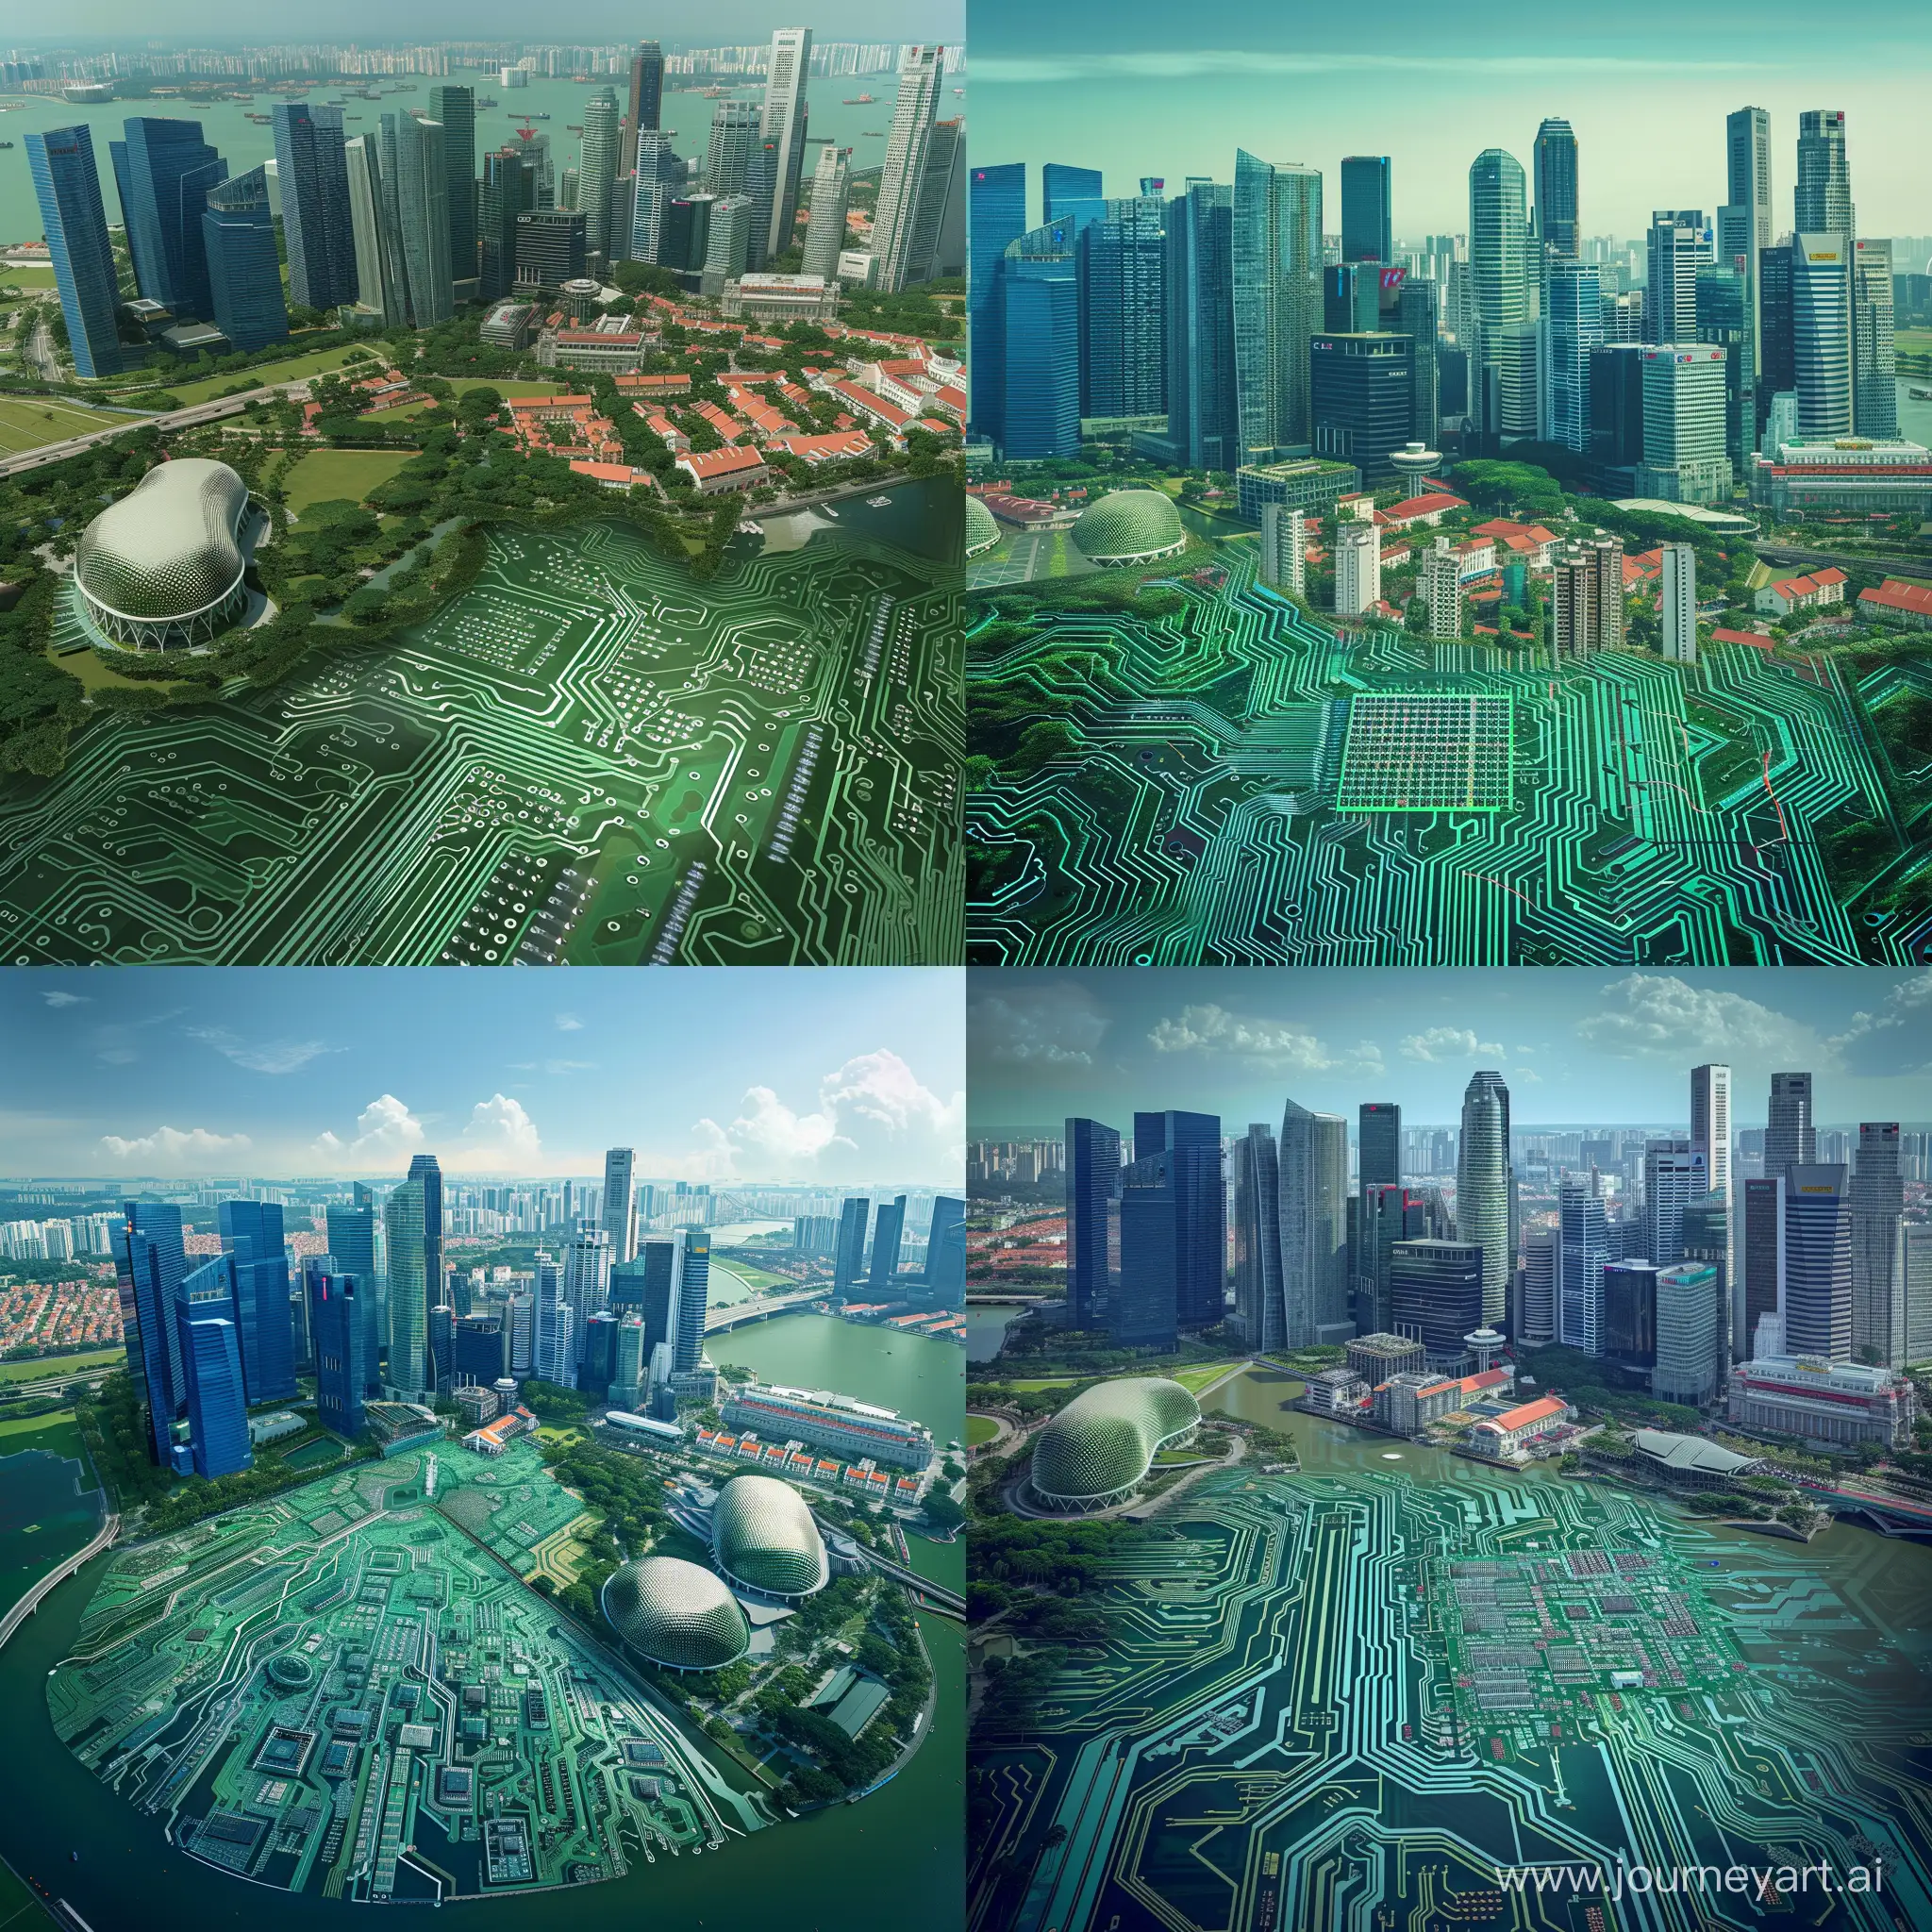 create an image of Singapore including the skyline. It should be interwoven with a computerchip. Make it look photorealistic